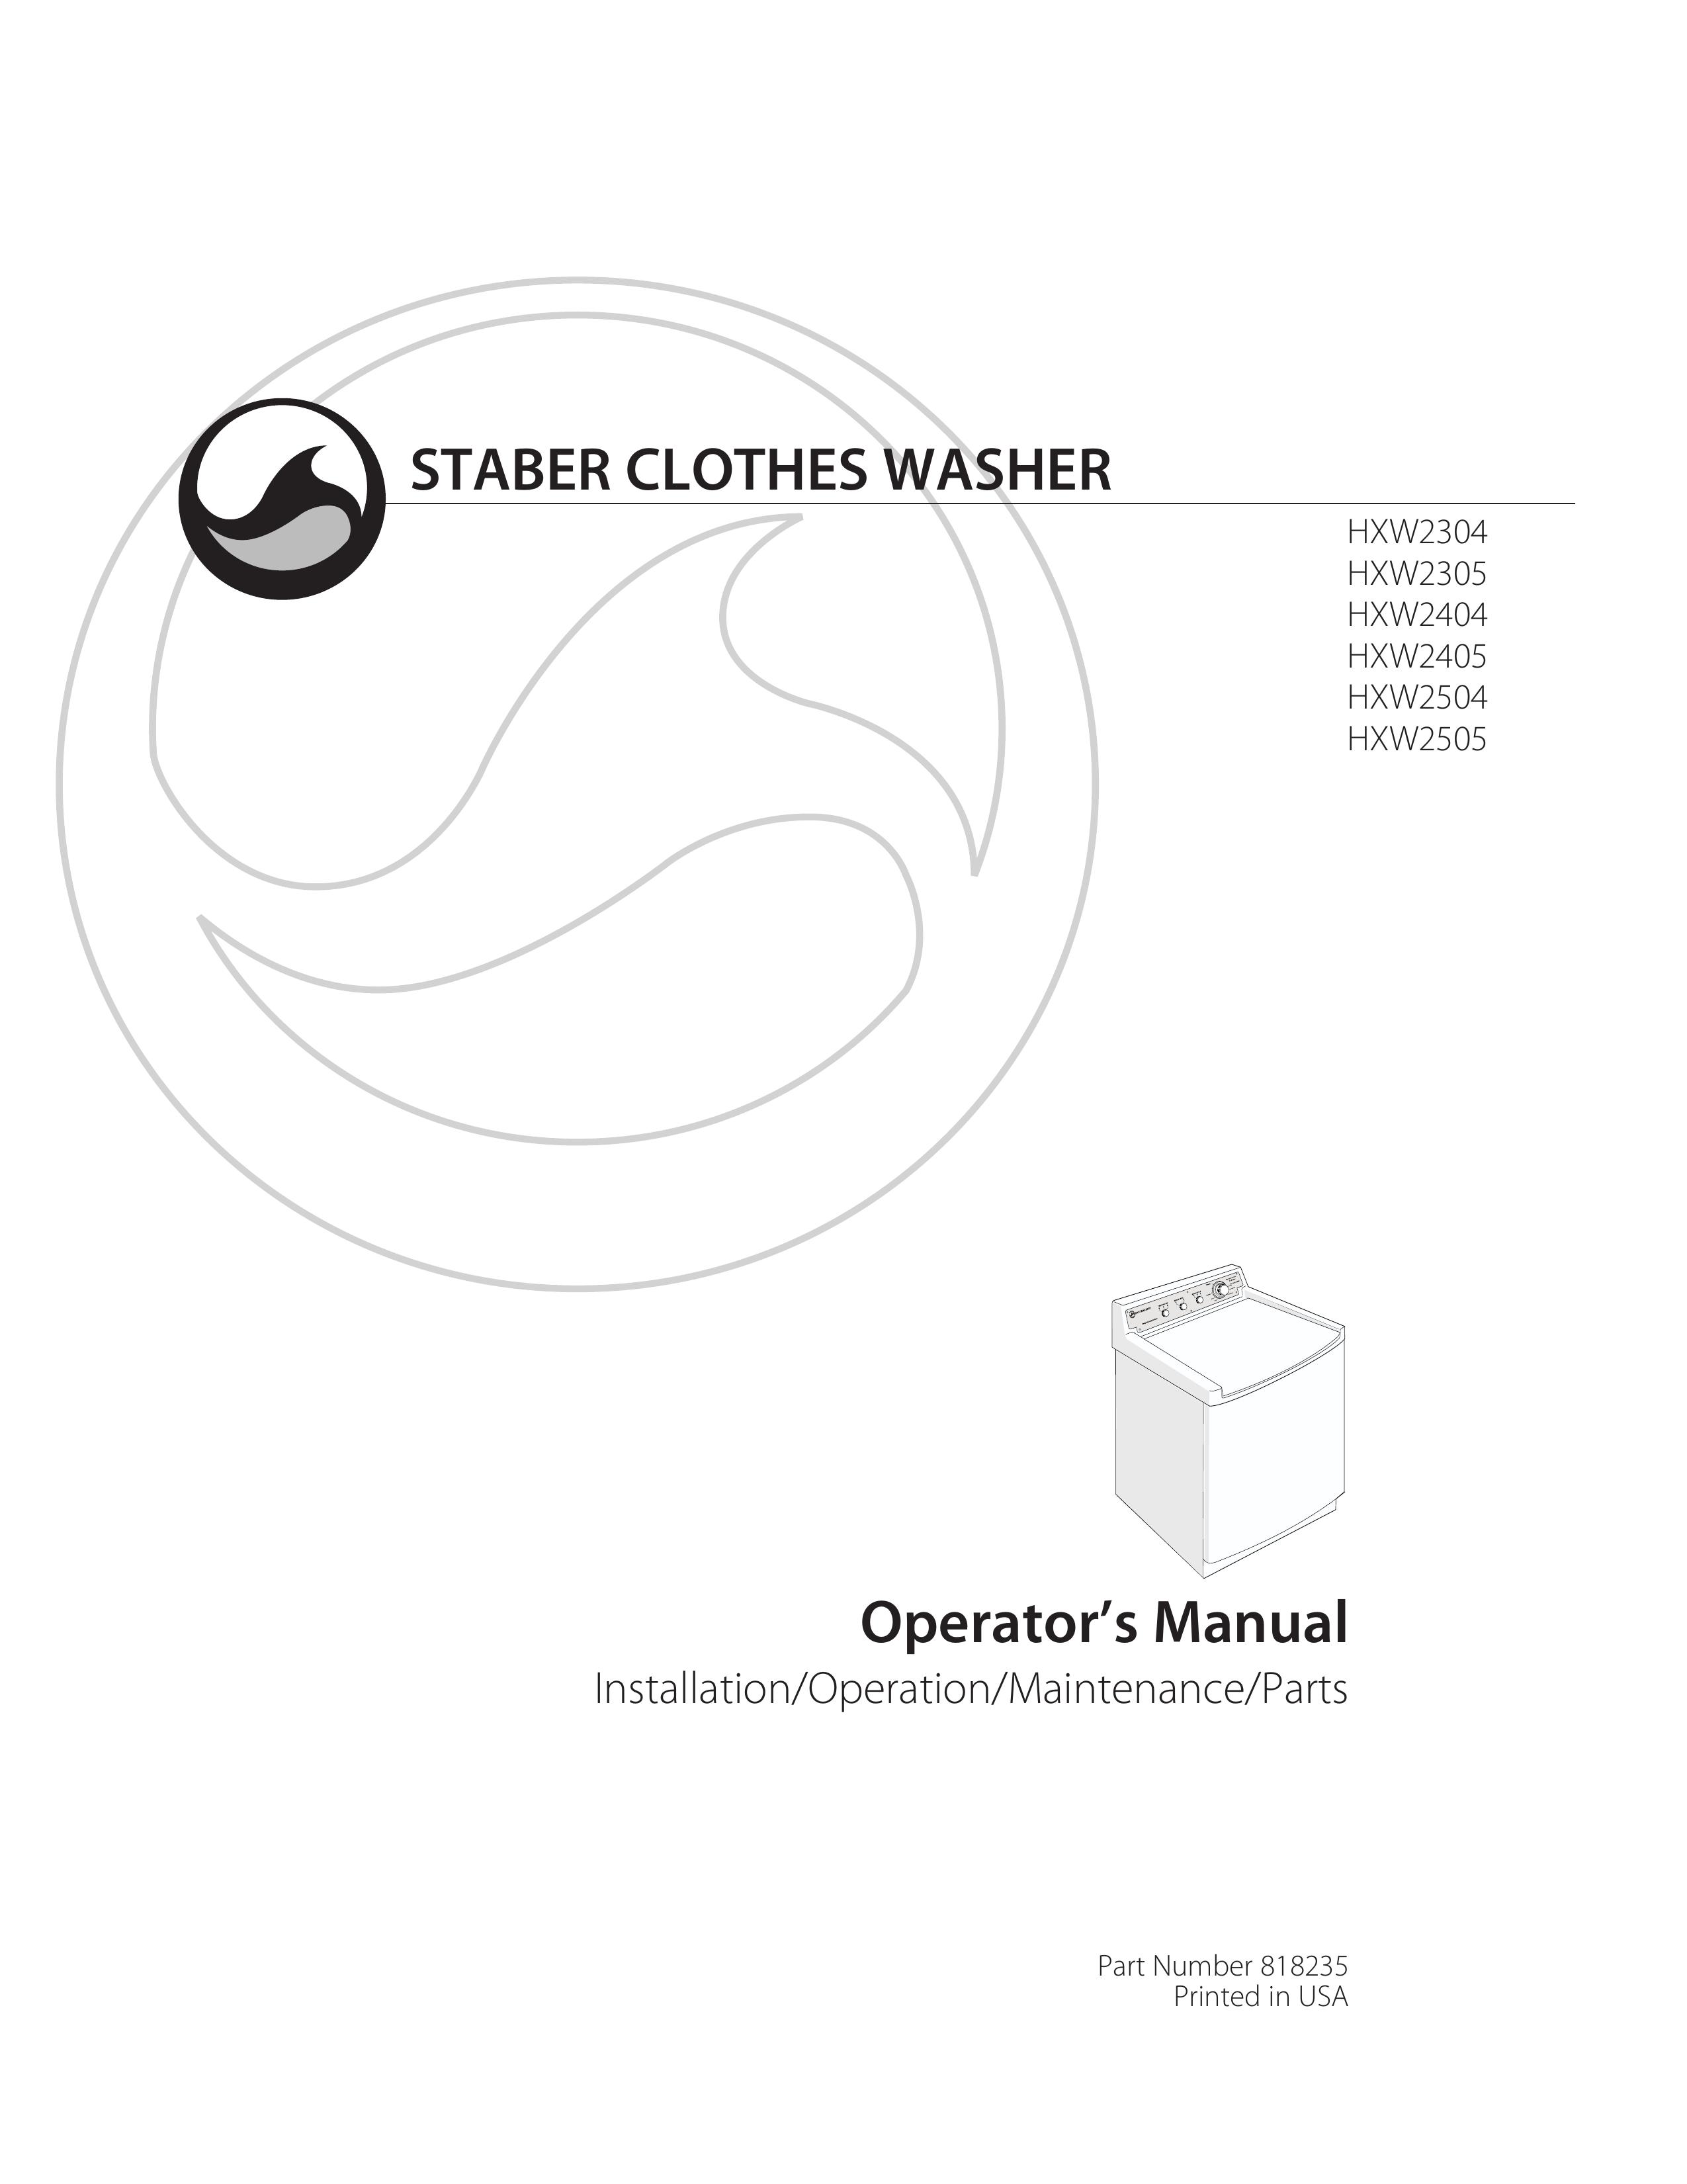 Staber Industries HXW2405 Washer User Manual